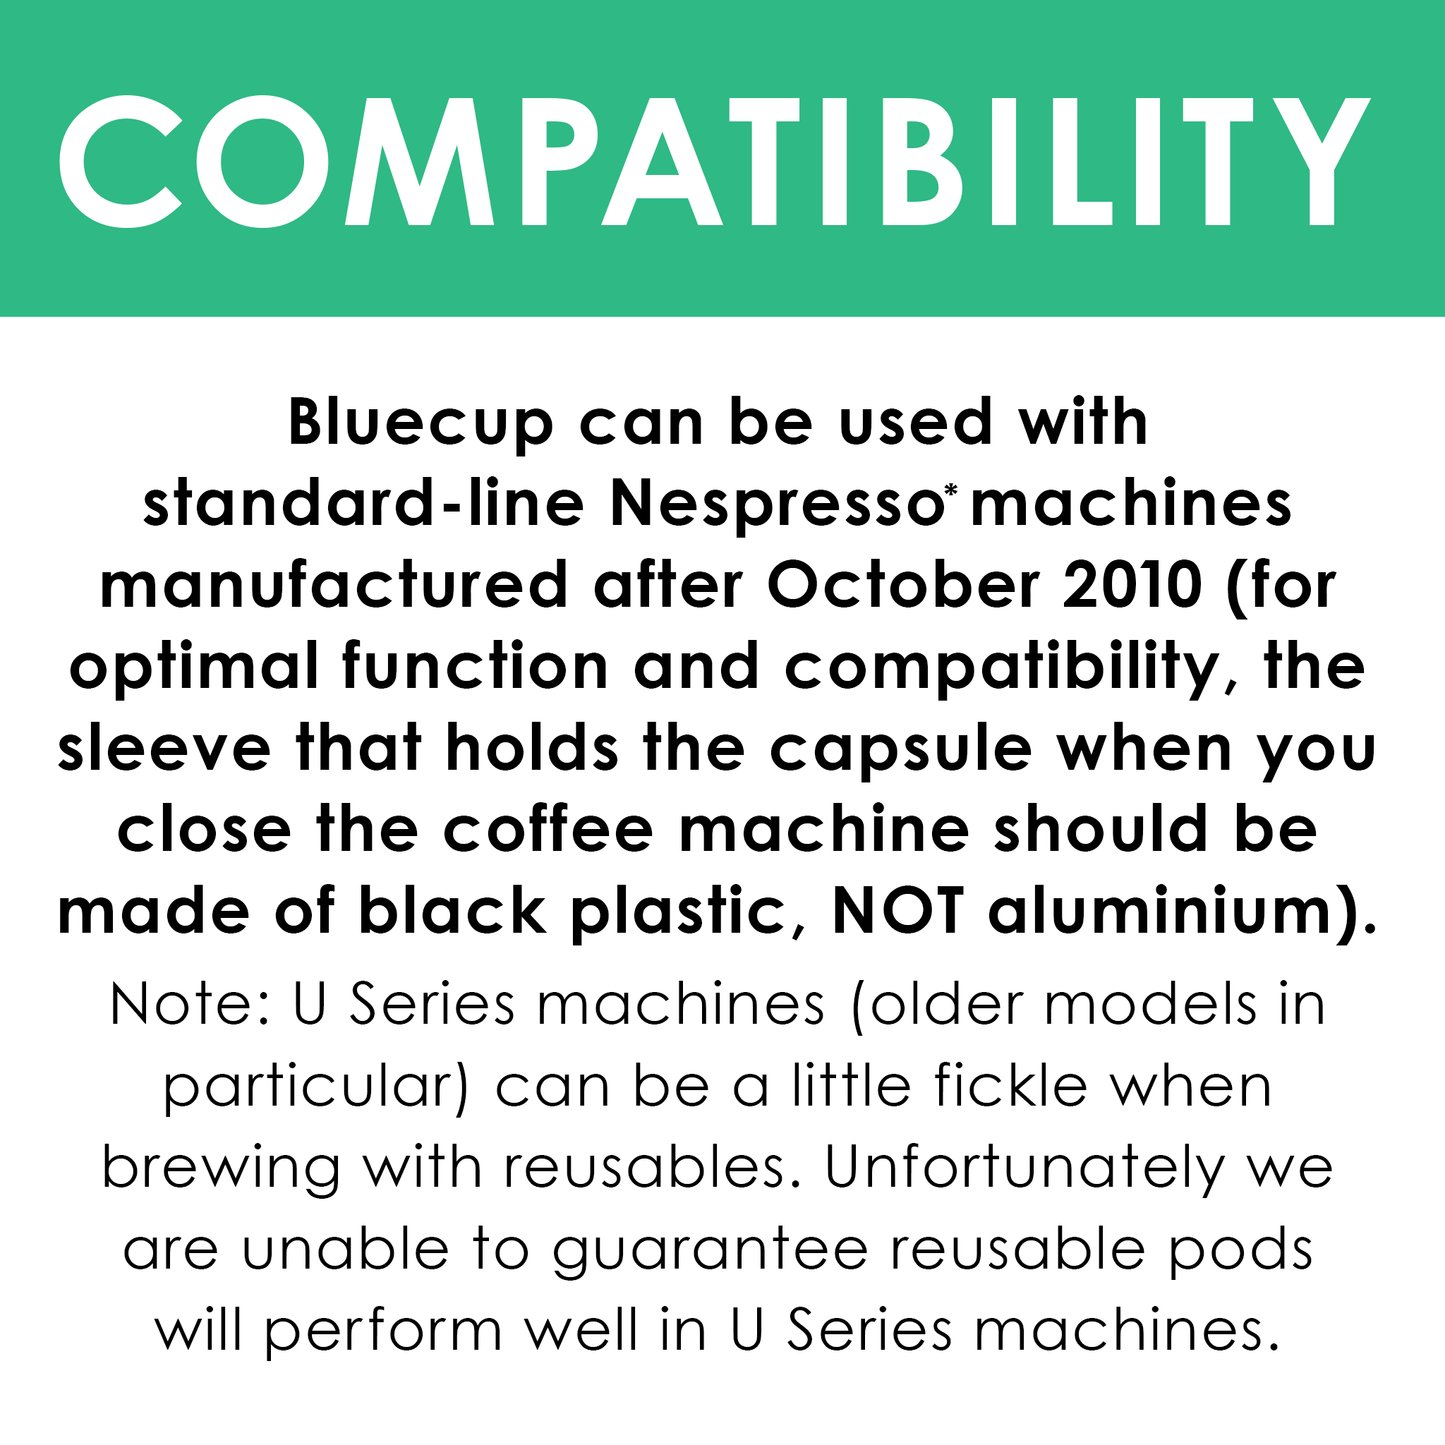 Bluecup Nespresso compatible: Works with all models made after 2010